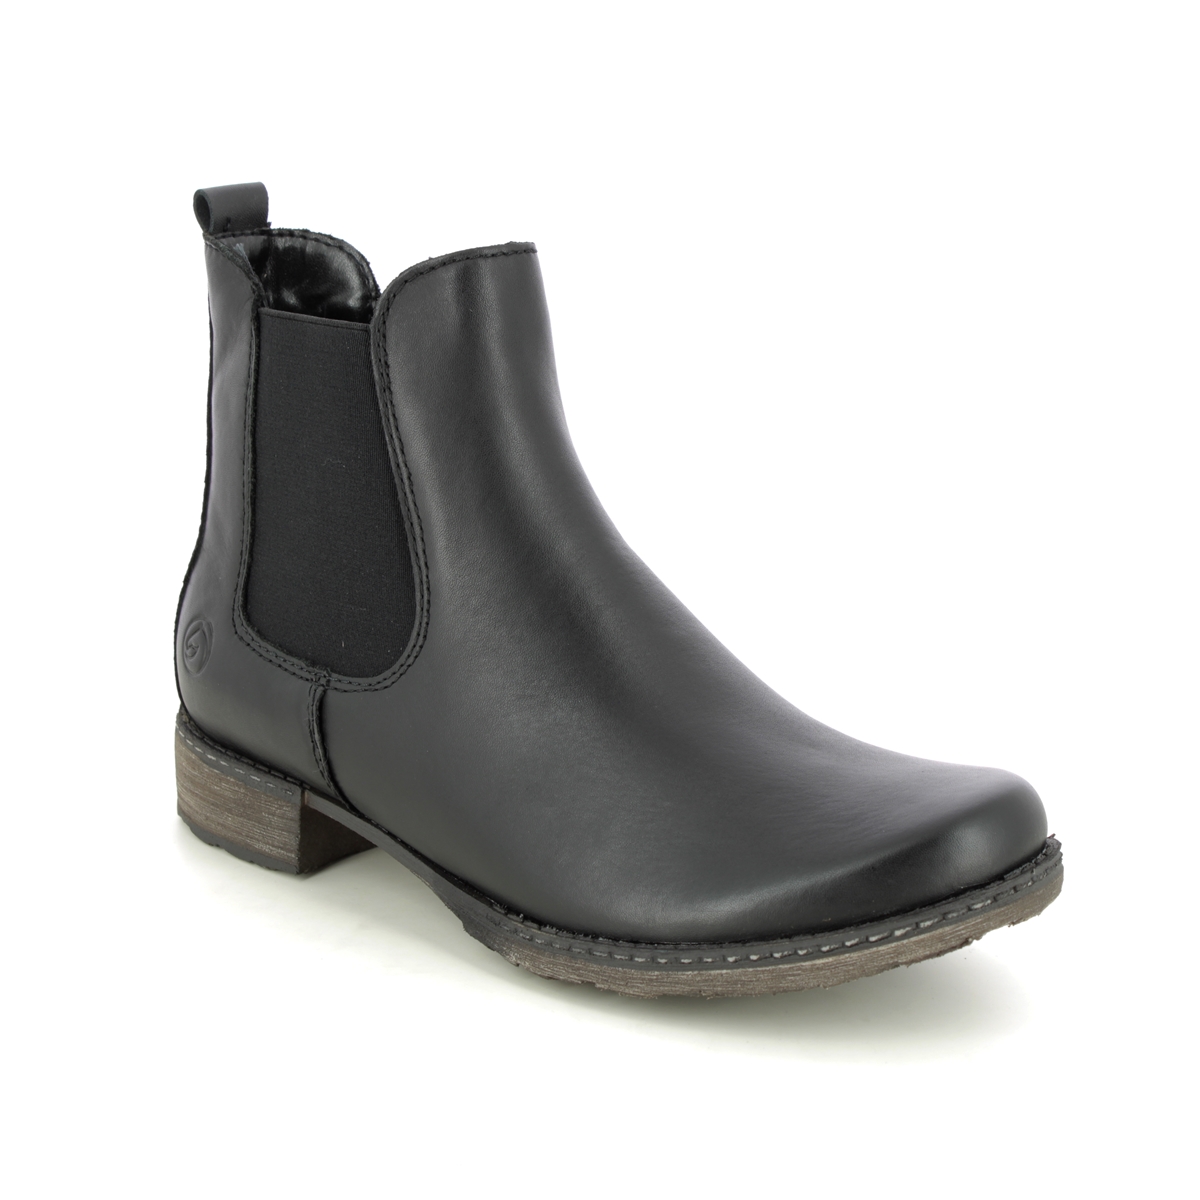 Remonte Peesicha Black Leather Womens Chelsea Boots D4375-00 In Size 38 In Plain Black Leather